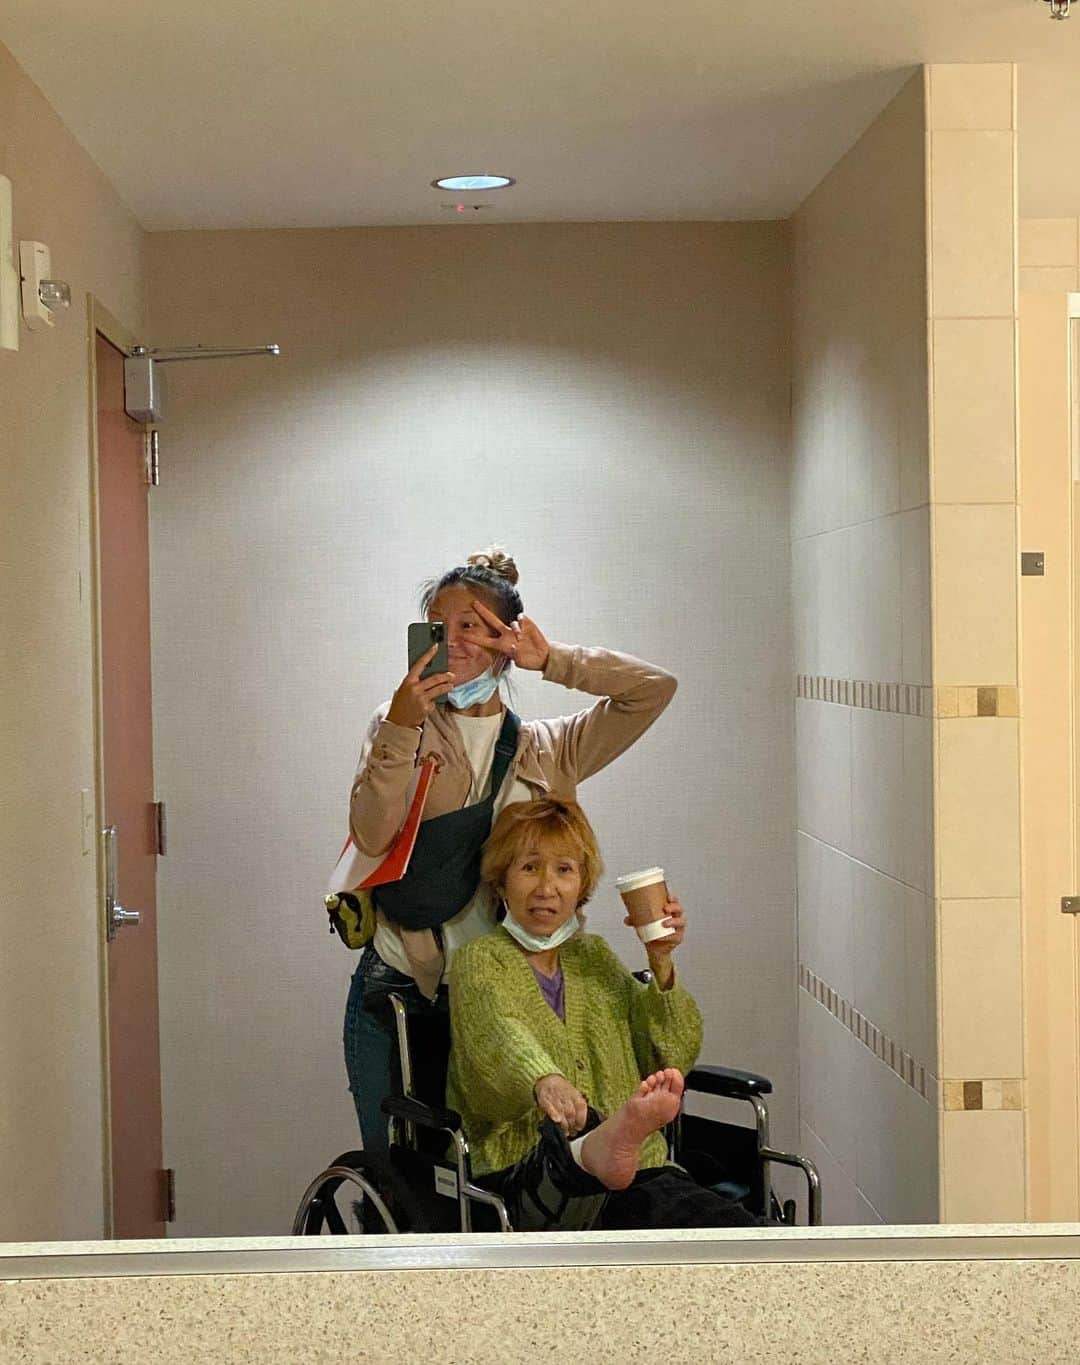 エビアン・クーのインスタグラム：「Mama fell at the store when her shoes got caught on a plastic bag - and landed on her knee cap. We got X-ray done, it showed her knee cap was fractured. Got surgery a week ago. What’s amazing about my mom is, she is strong that she didn’t want to cancel my trip; Fukuoka & Taiwan. She didn’t want to be a burden, so she wanted me to go on the trip. Mama you’re truly the best, you work the hardest, funniest and always teaches me to enjoy life. I know you’re sad about not joining us, but once you’re well, we will all go on a vacation but meanwhile you deserve all the rest you need. I need you to recover!! Thanks for those who’s been reaching out to us!  **She looks happy but she’s in pain…   P.S ILA loves strawberries 🍓   ママは店で靴がビニール袋に引っかかって転んで、 足のひざお皿をわっちゃったの。 X線を撮ったところ、 膝蓋骨が骨折していることがわかって😅 本当にママはいつもせっかちで。  1週間前に手術をしたんだよね。 私の母の素晴らしいところは、 私の旅行をキャンセルしたくなかったみたいで福岡と台湾のプランを変えないでって。本当にいつも自分を2番目にする。  足は今こんな状態だけどいっぱい休んで欲しい。 ママは一番一生懸命働いて、一番面白くて、 人生を楽しむことをいつも教えてくれる。  気遣ってママにメール送ってくれてありがとう 本当にいっぱいの人が愛情を❤️‍🔥ママにありがとう 幸せものです。」